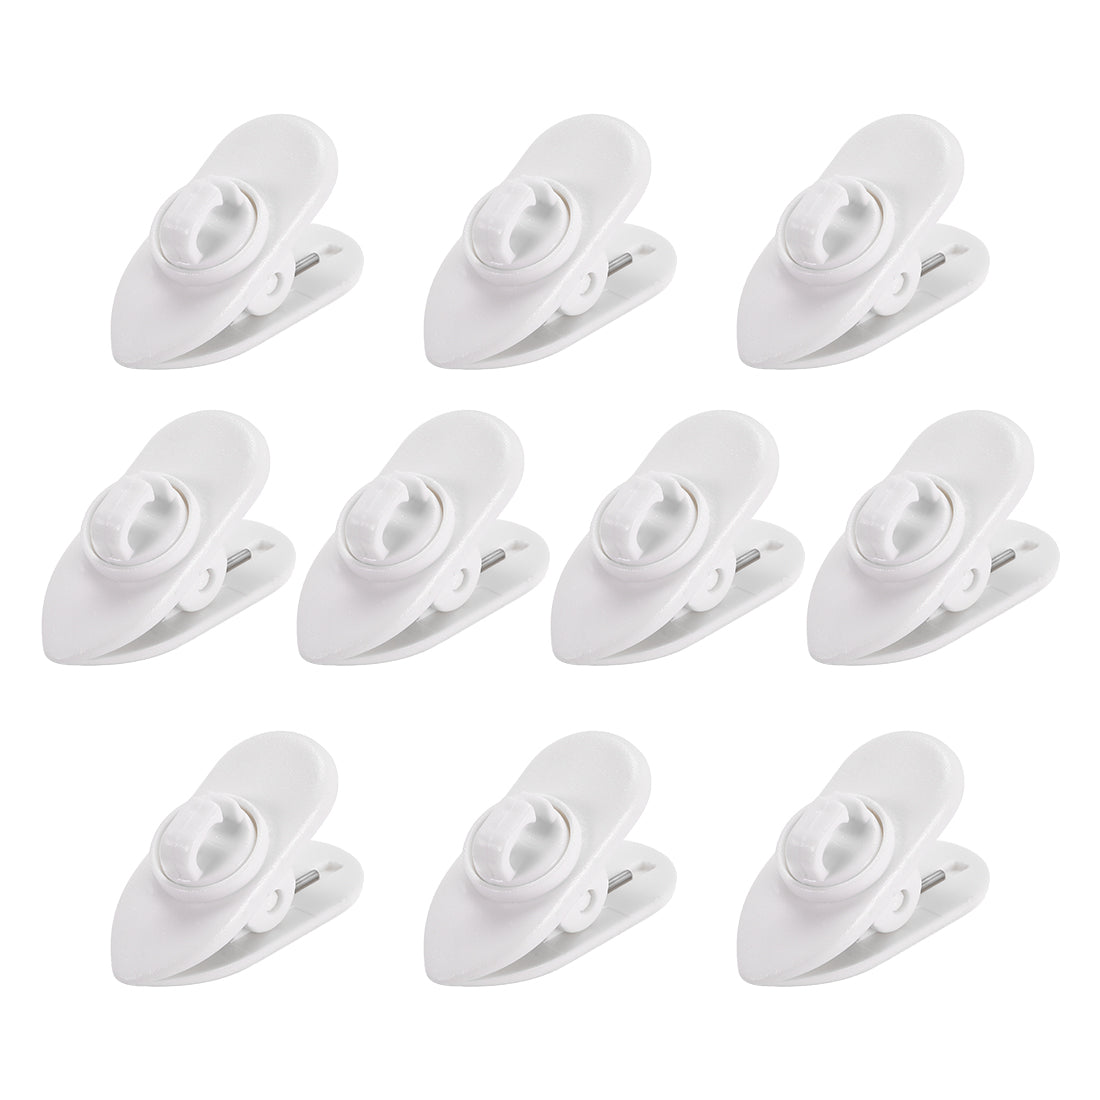 uxcell Uxcell 10 Pcs Earphone Clips Wire 360 Degree Rotate White Earphone Cable Clothing Clip